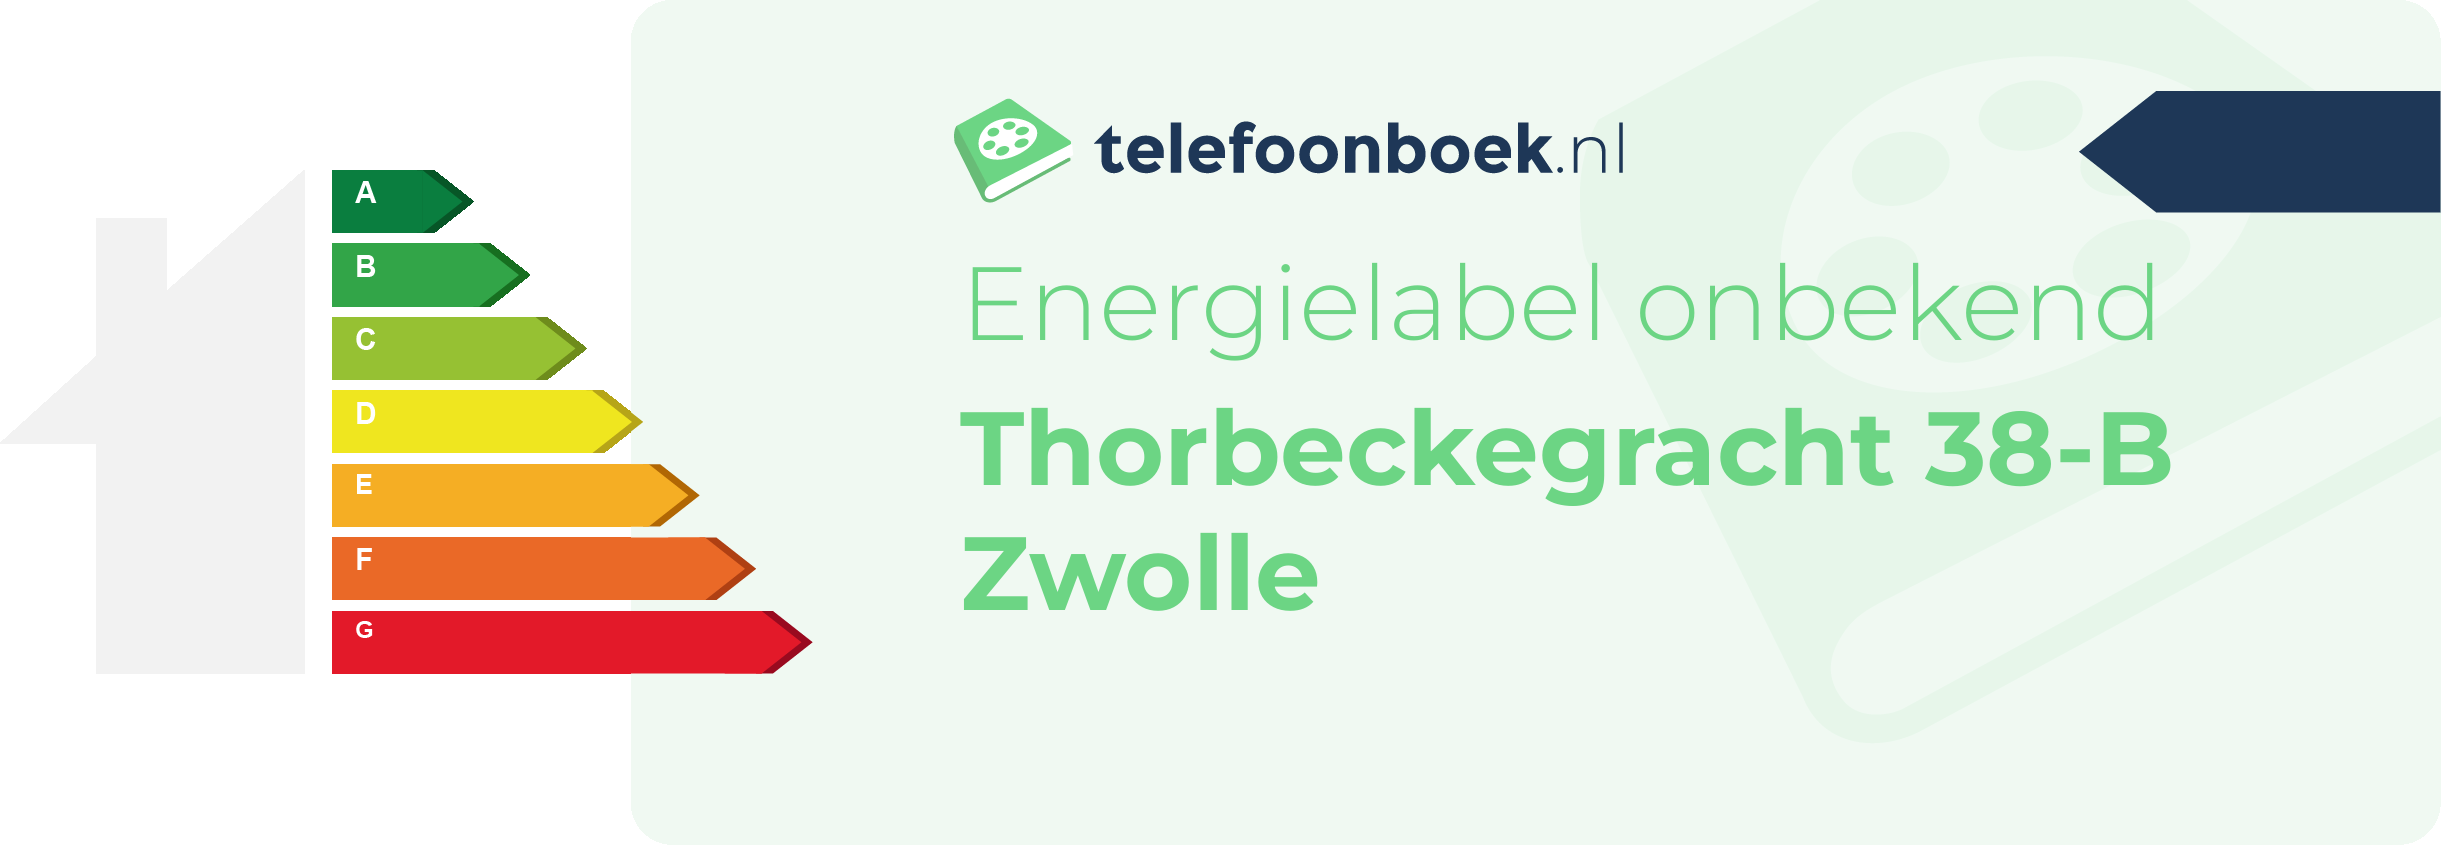 Energielabel Thorbeckegracht 38-B Zwolle